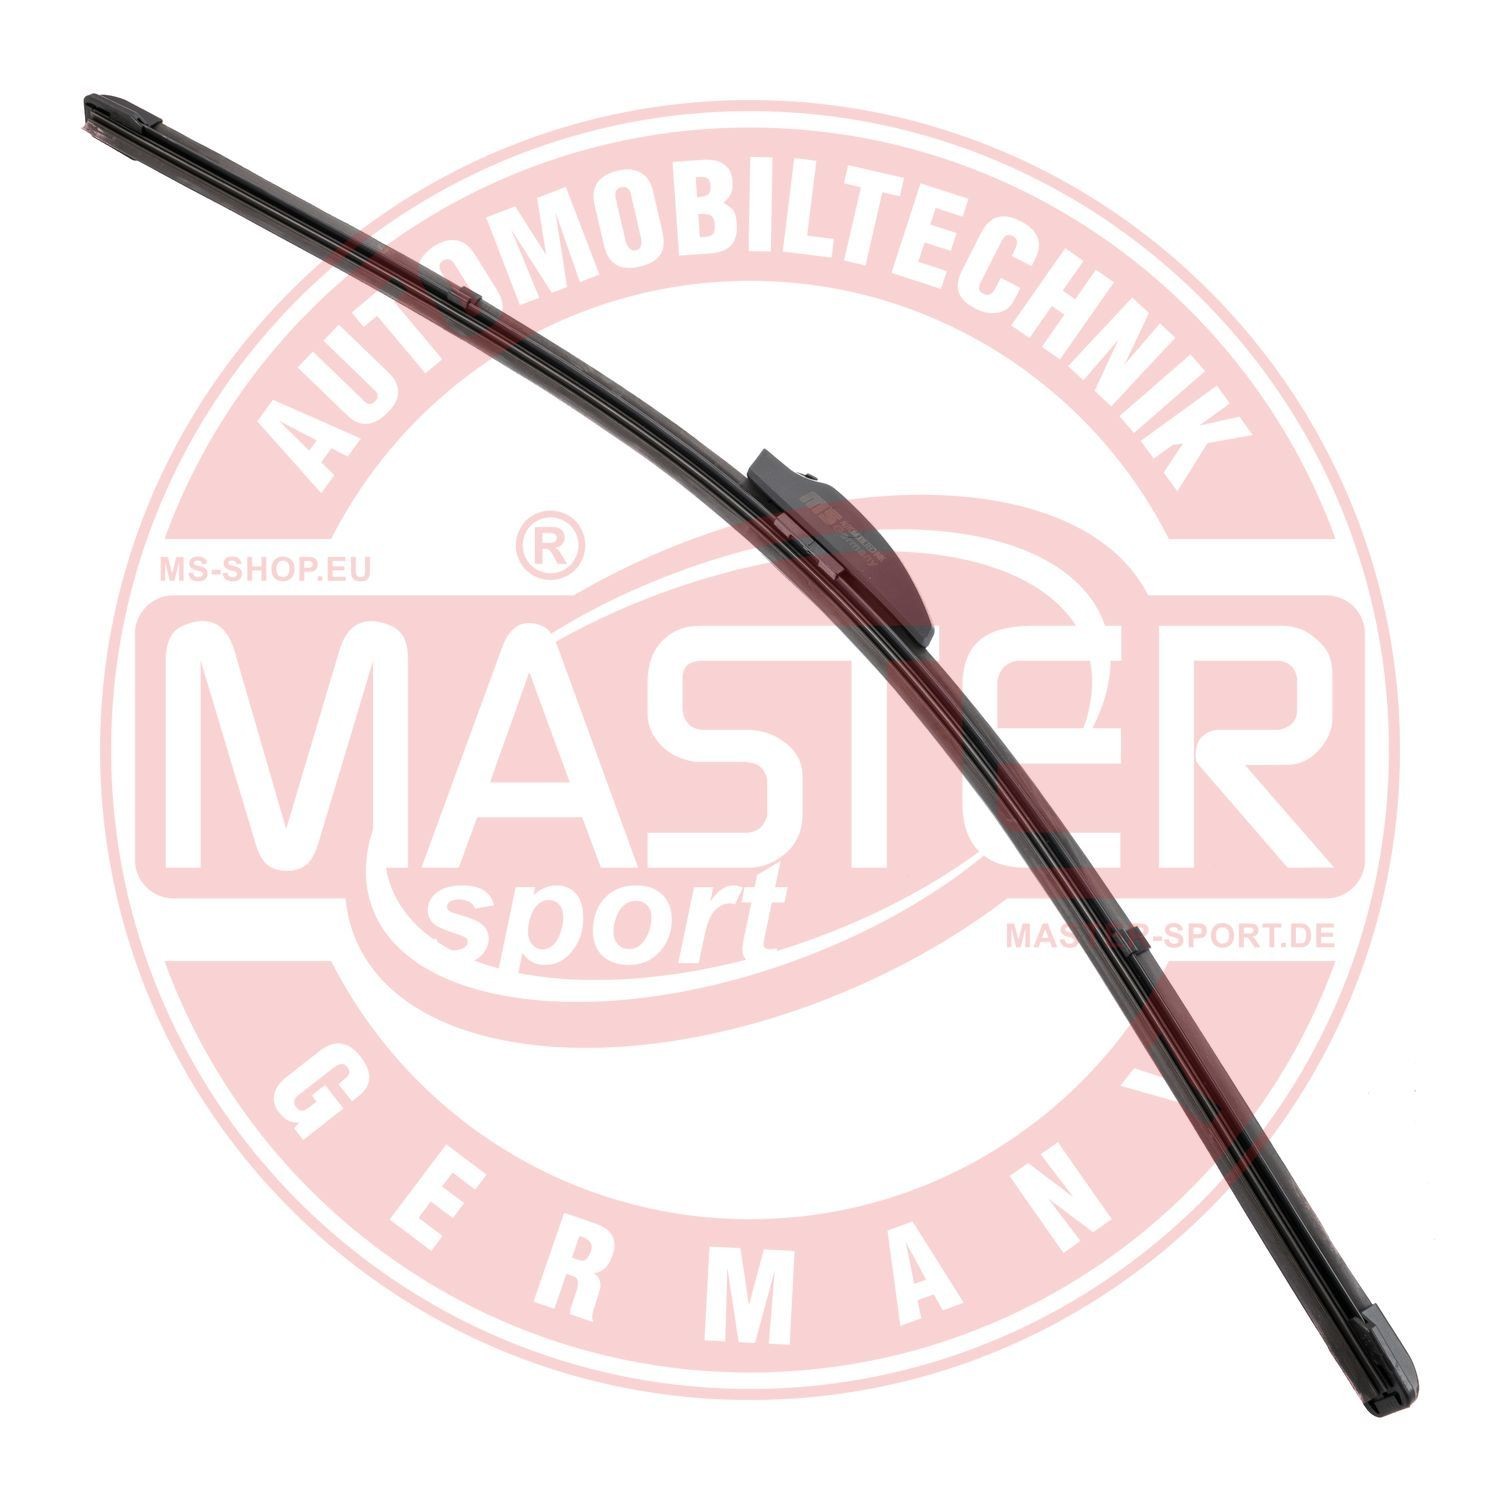 Ford FOCUS Window wipers 15878935 MASTER-SPORT 23-B-PCS-MS online buy